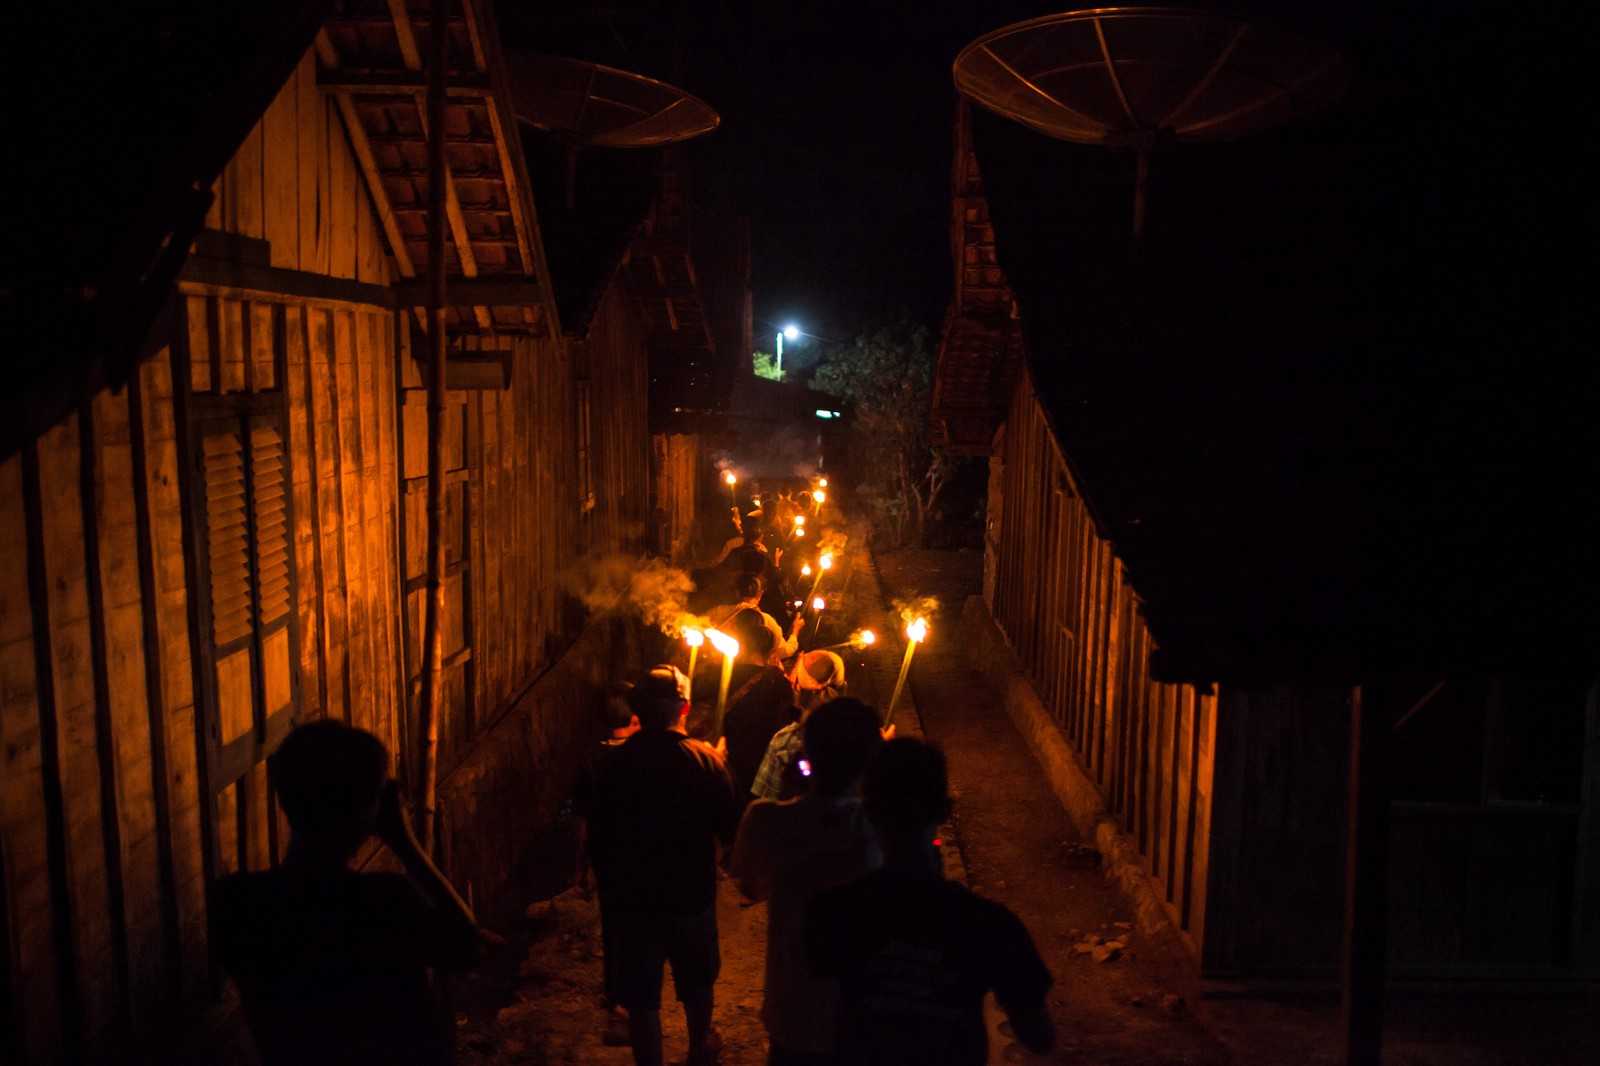 The villagers parade through Tegaldowo at night as part of the festival. By Leo Plunkett for The Gecko Project/Mongabay.